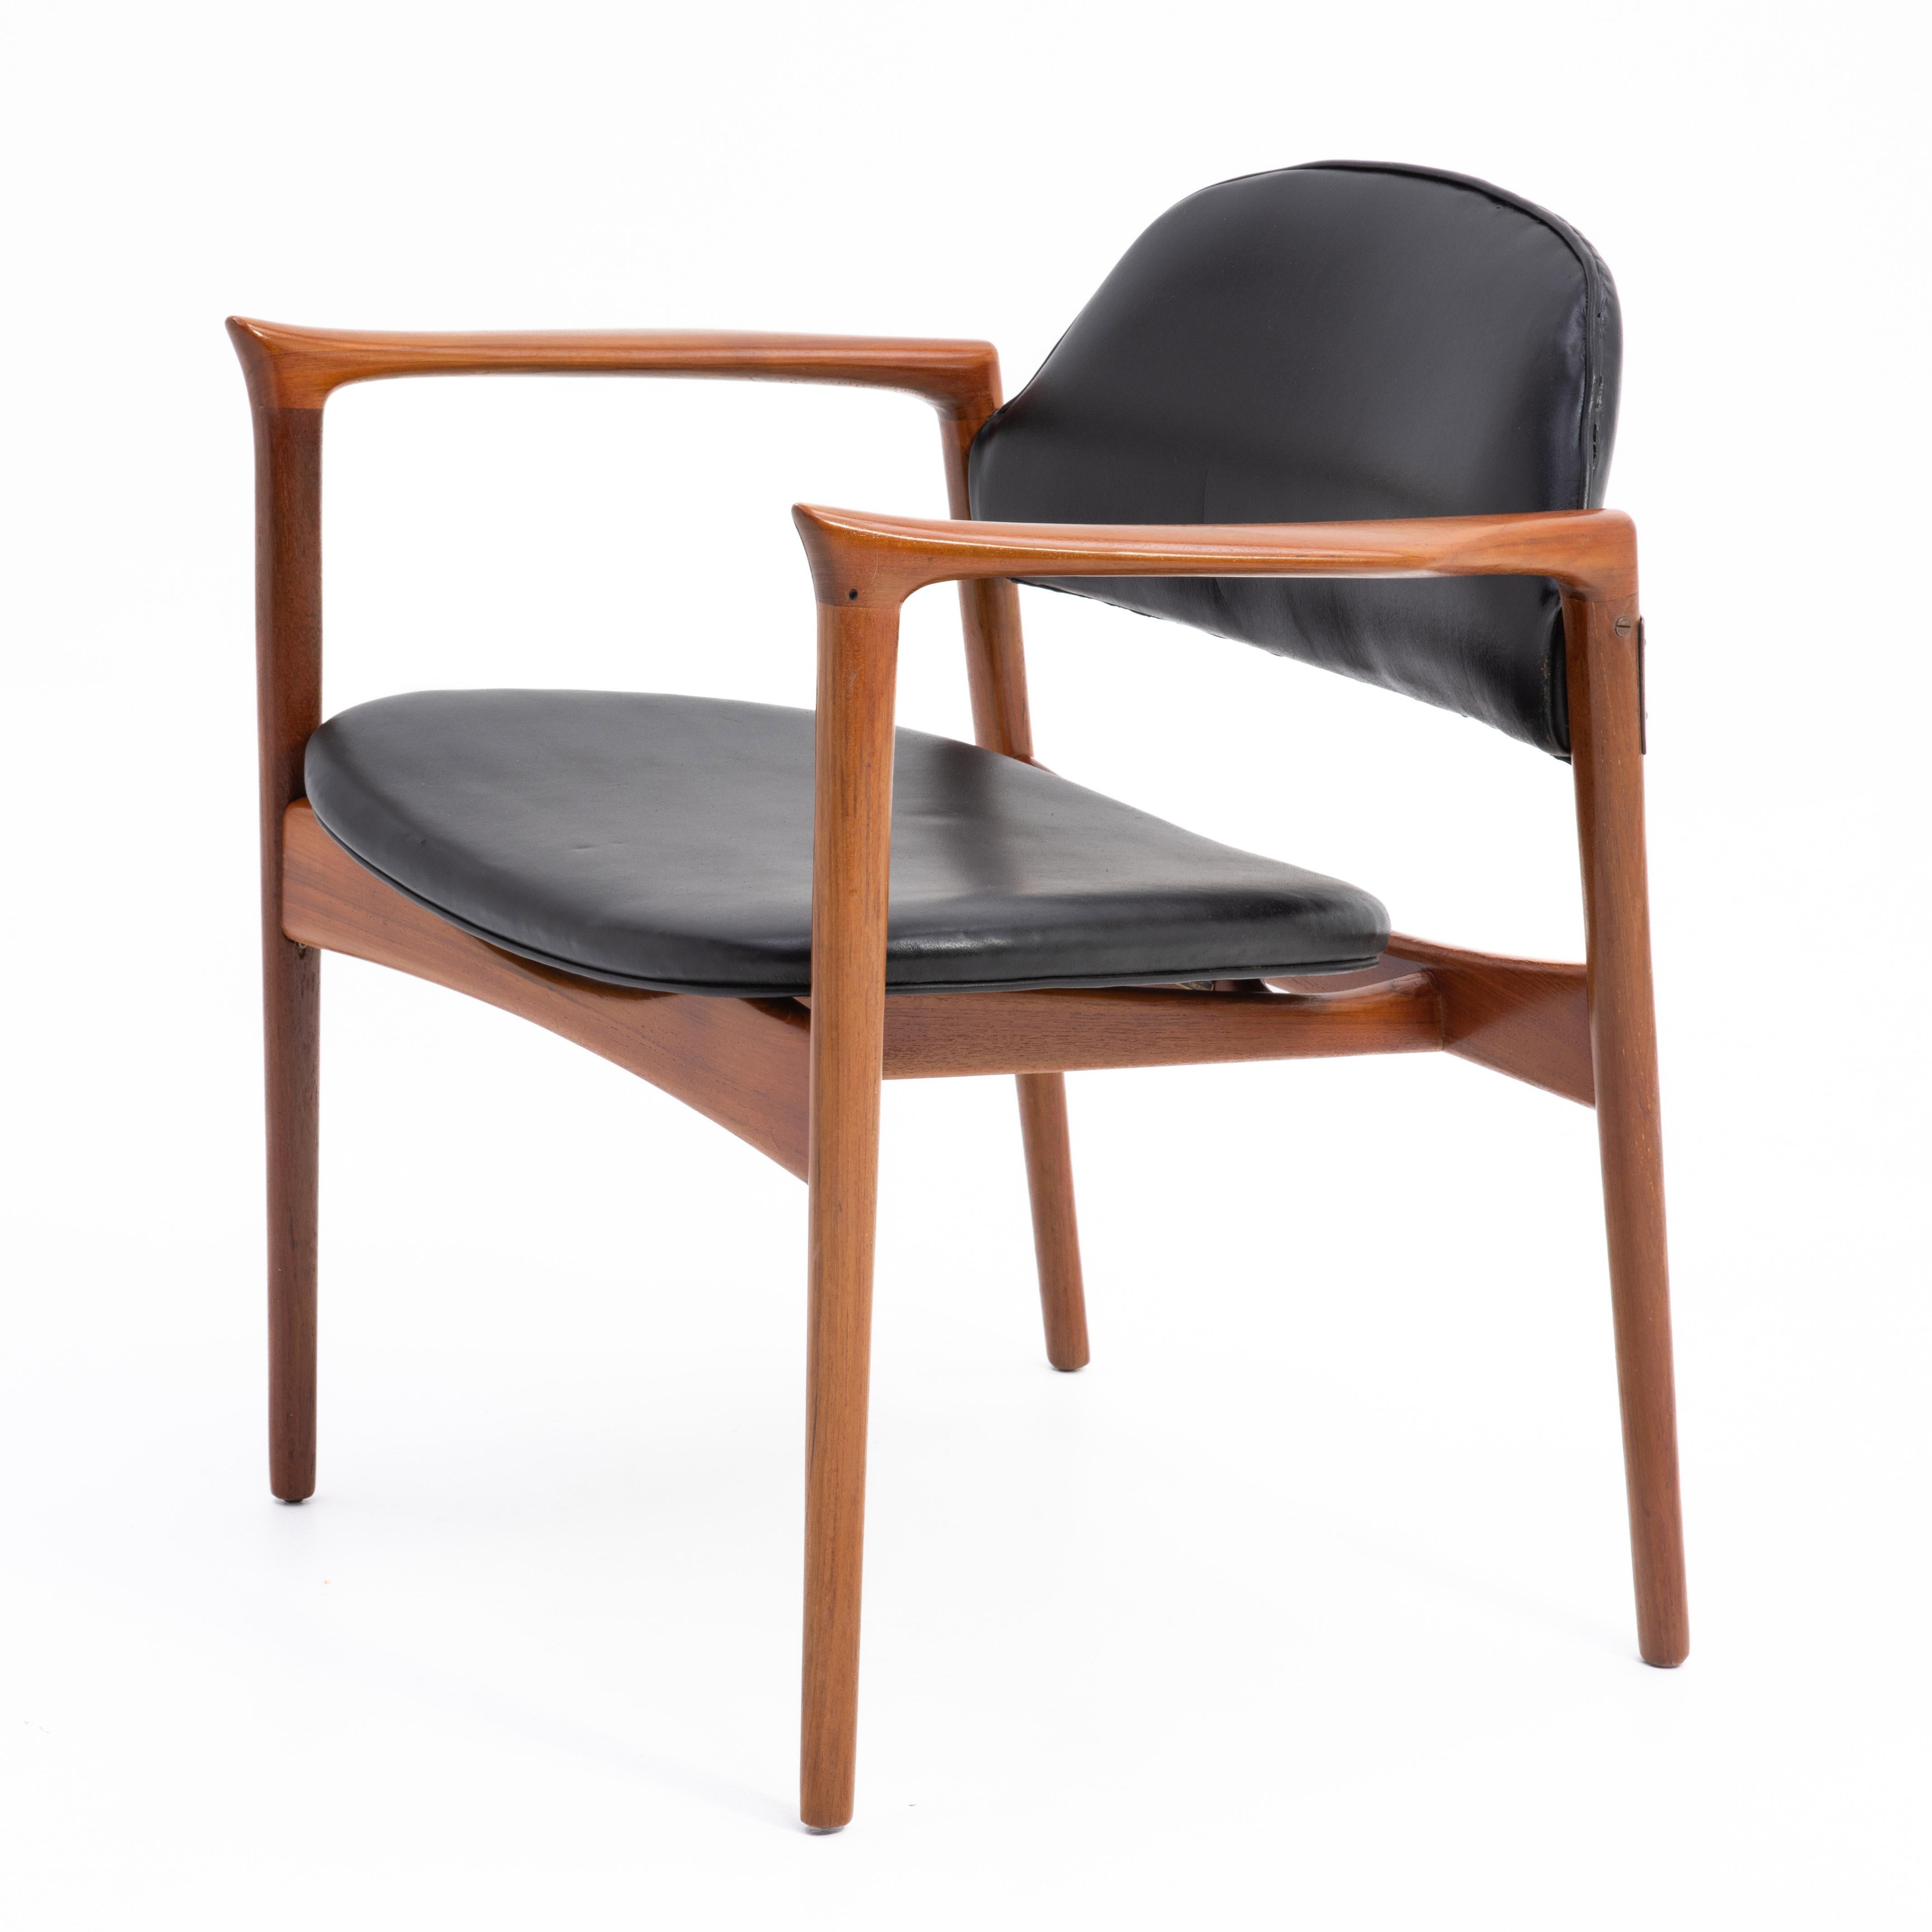 A rare and beautifully restored Ib Kofod Larsen for Selig Danish Teak Armchair with a floating vinyl seat and back. Sometimes referred to as a 